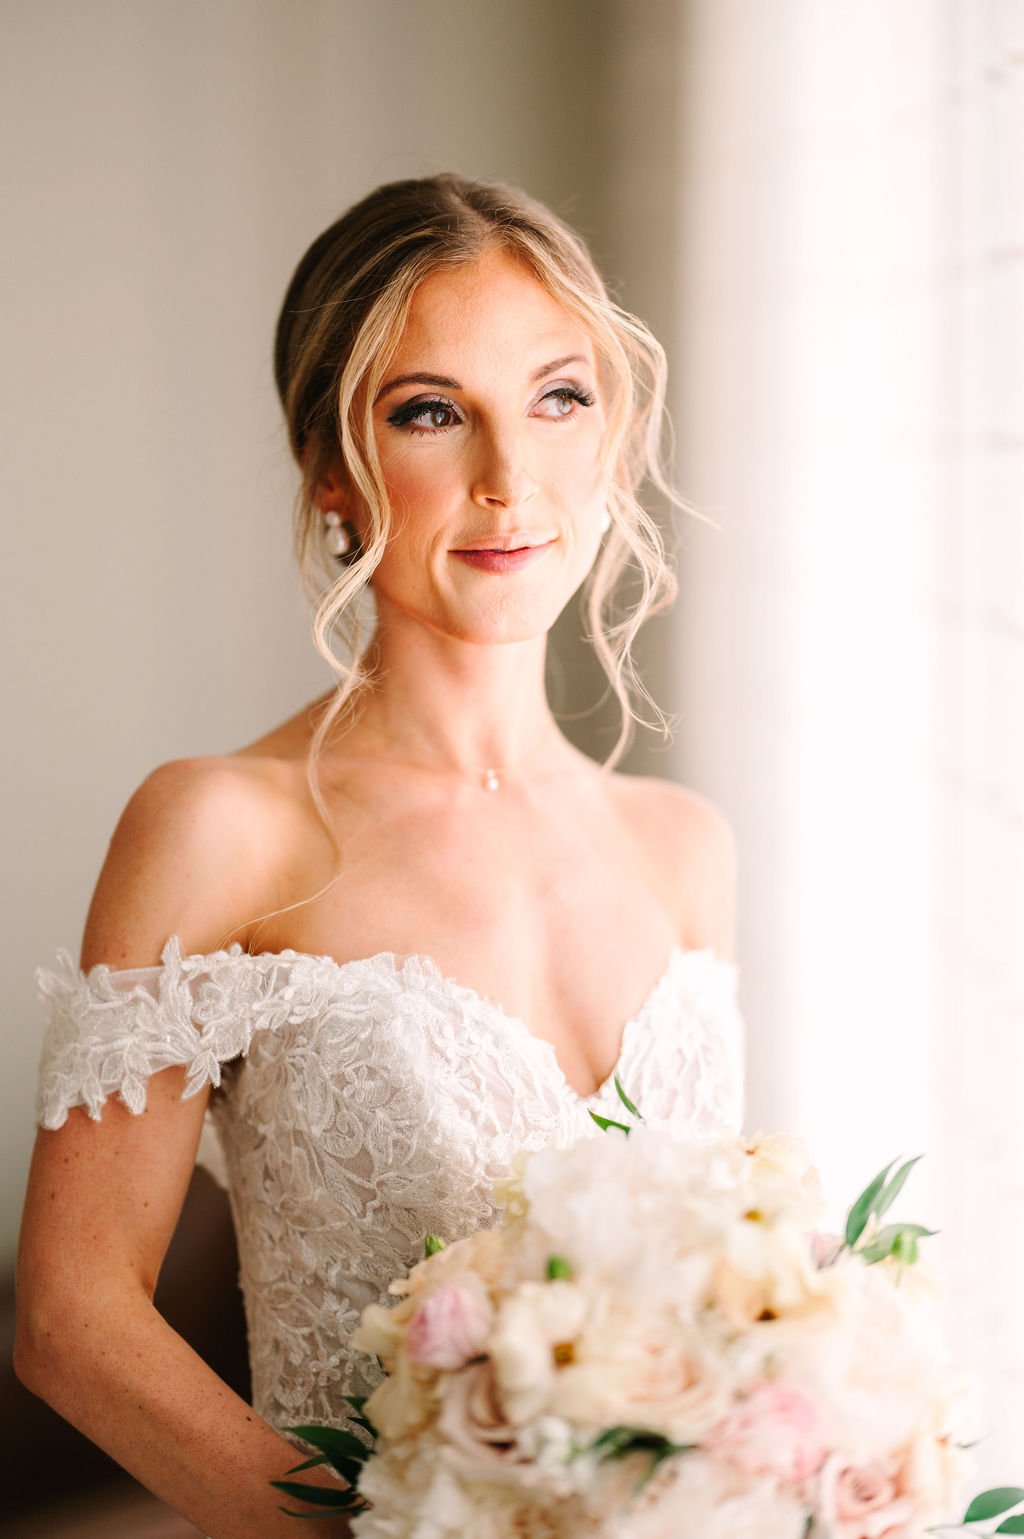 ivory-and-beau-bride-hayley-in-katell-by-maggie-sottero-a-clasic-fitted-lace-wedding-dress-with-sweetheart-neckline-purchased-from-savannah-bridal-shop-ivory-and-beau-4.jpg